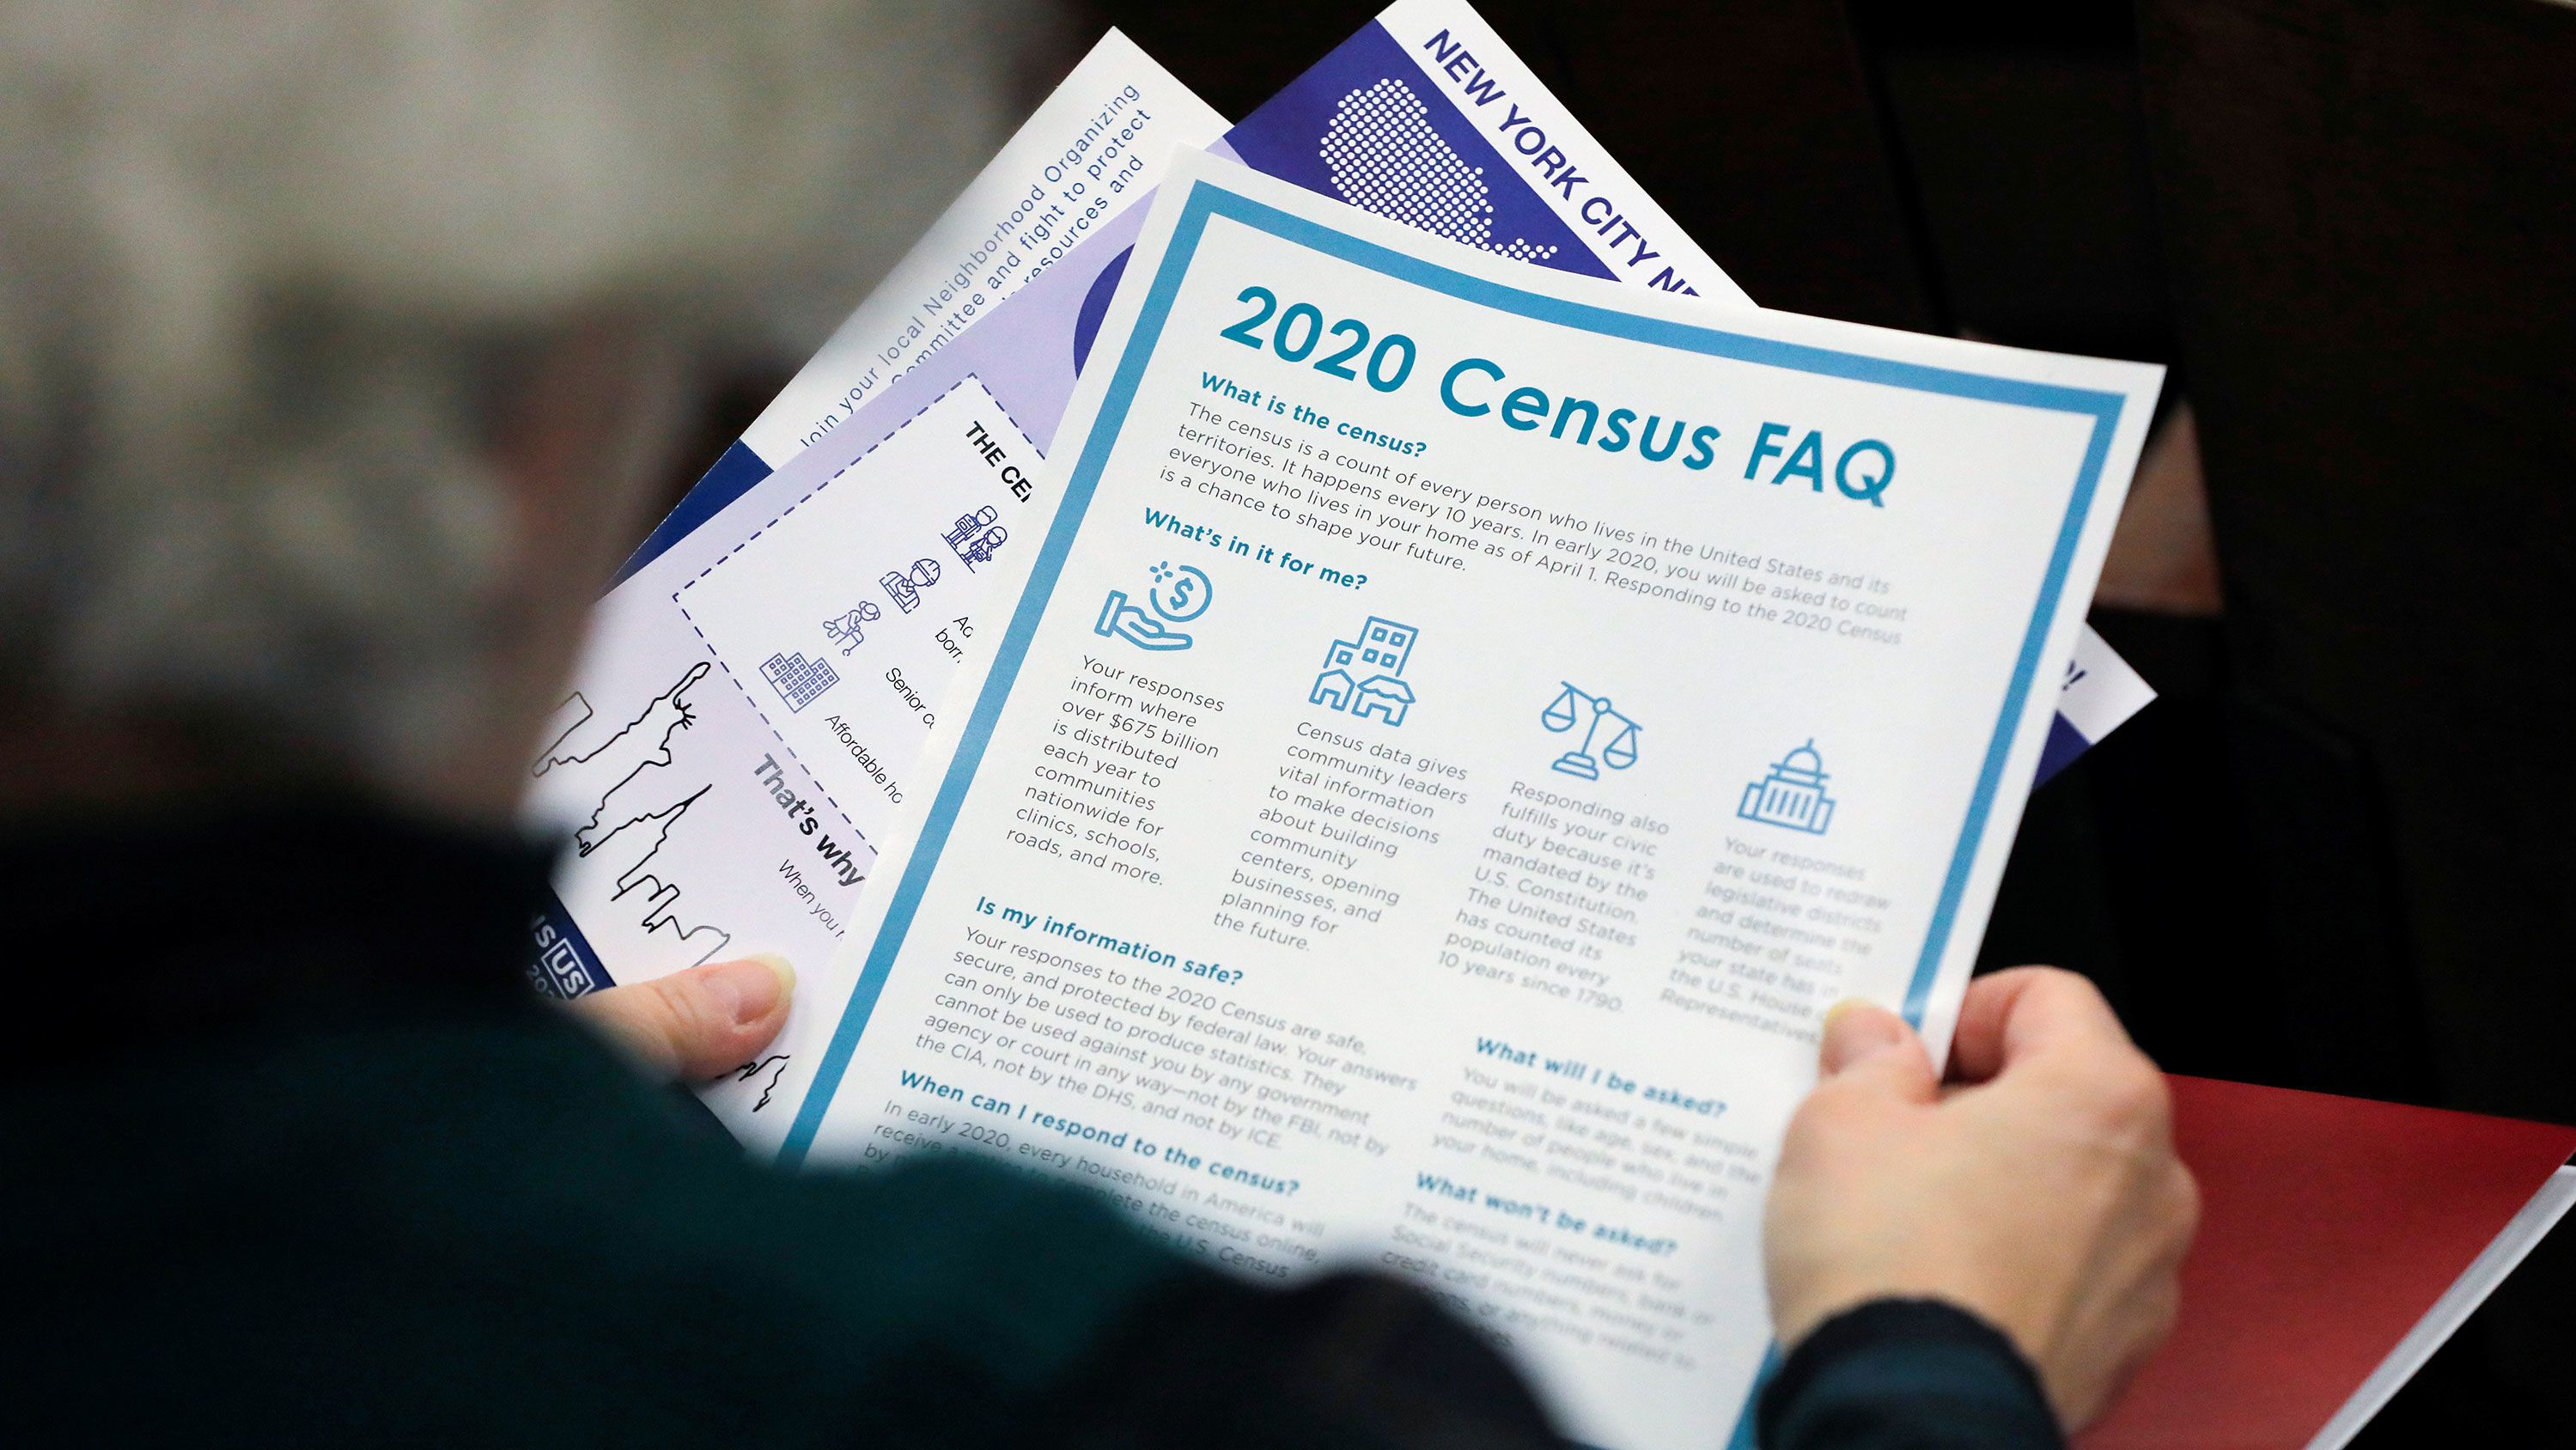 A person holds census information handed out at an event in New York City on February 22.